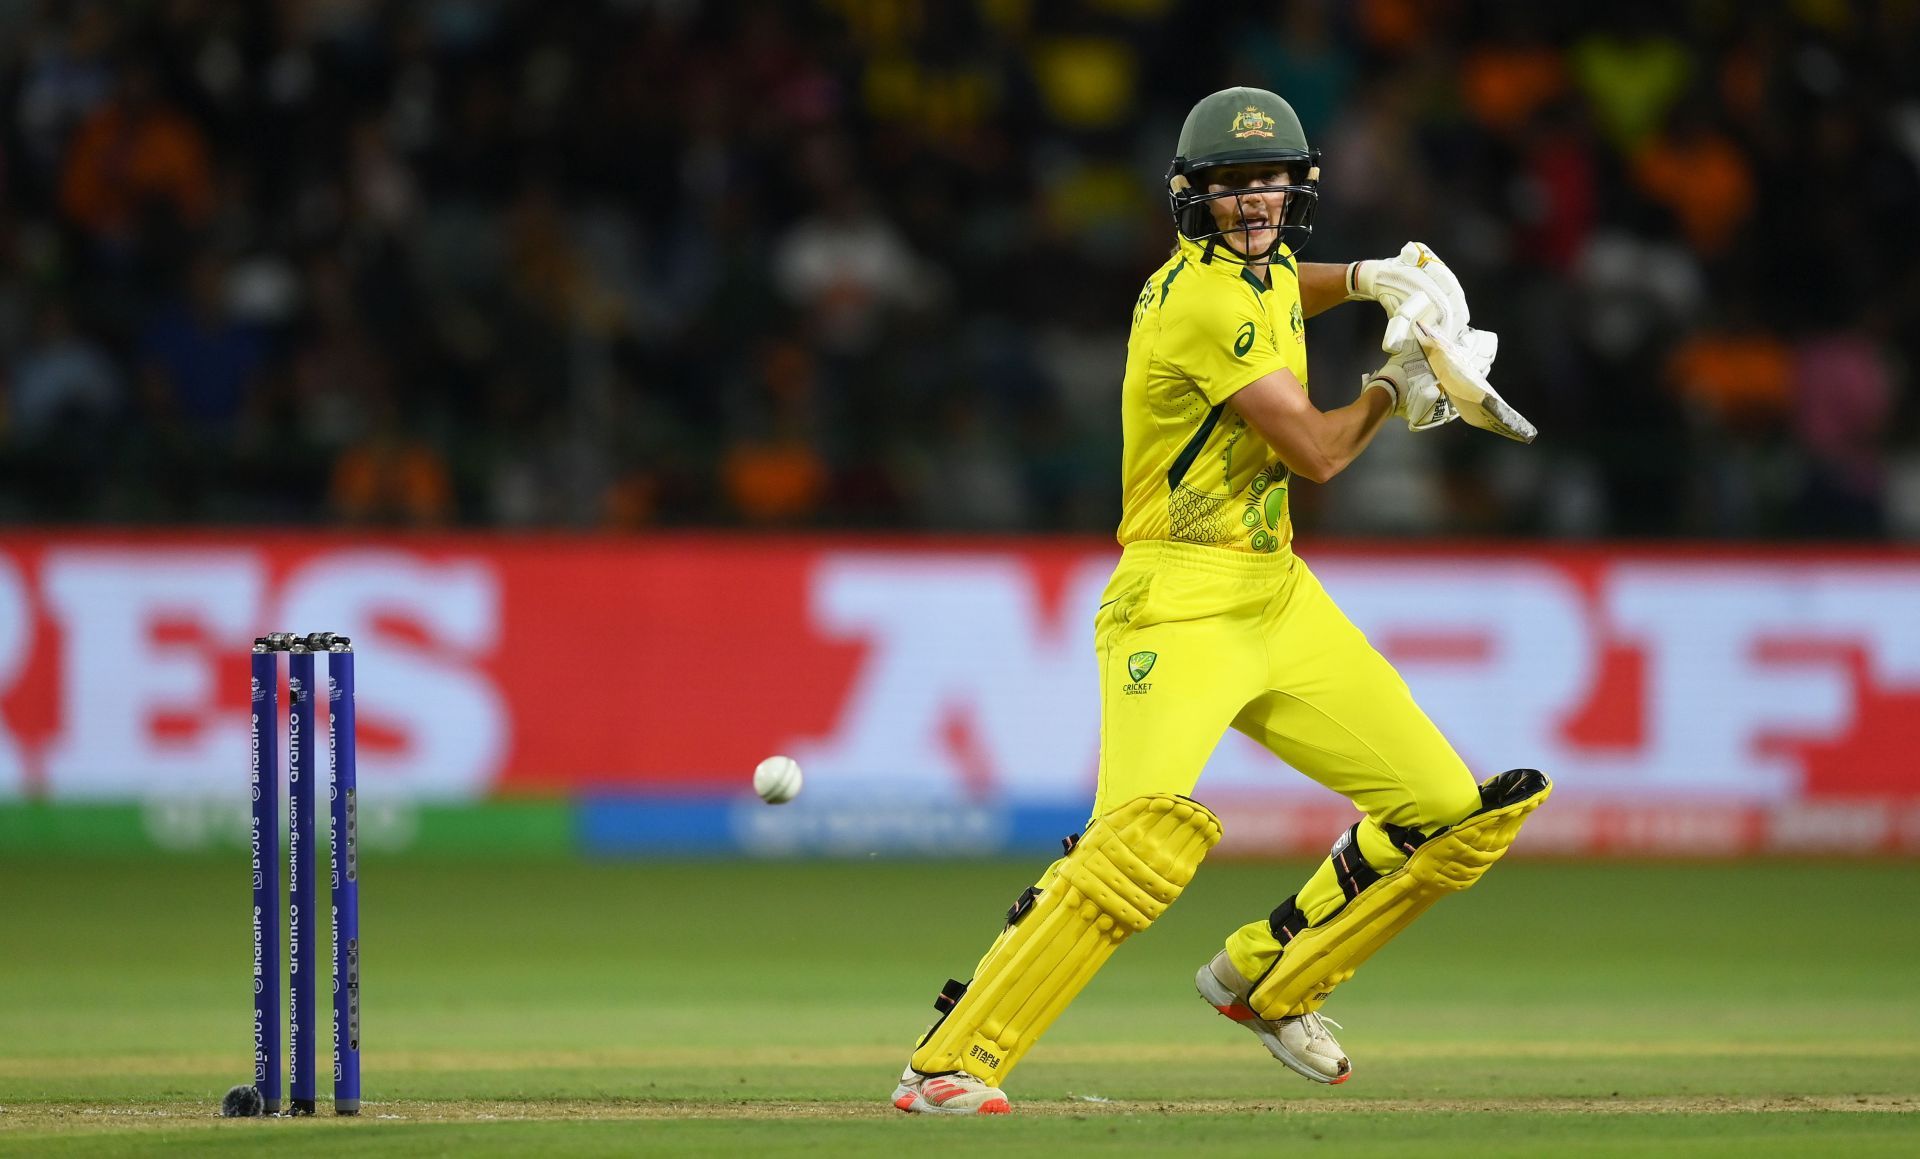 Ellyse Perry is a match-winner with bat and ball. Pic: Getty Images